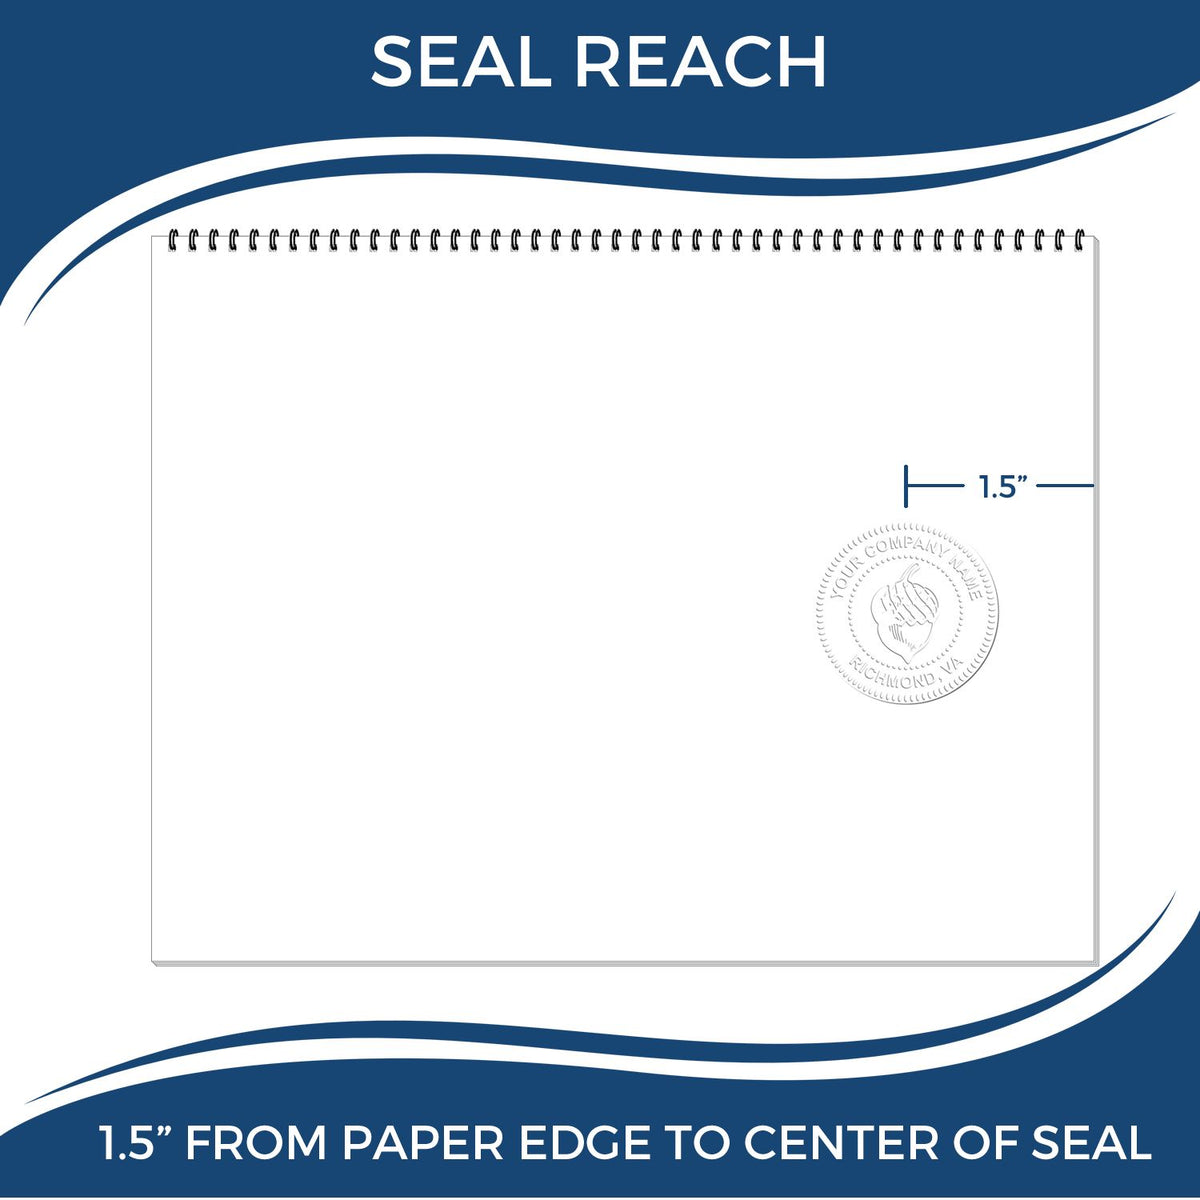 An infographic showing the seal reach which is represented by a ruler and a miniature seal image of the Hybrid Illinois Landscape Architect Seal